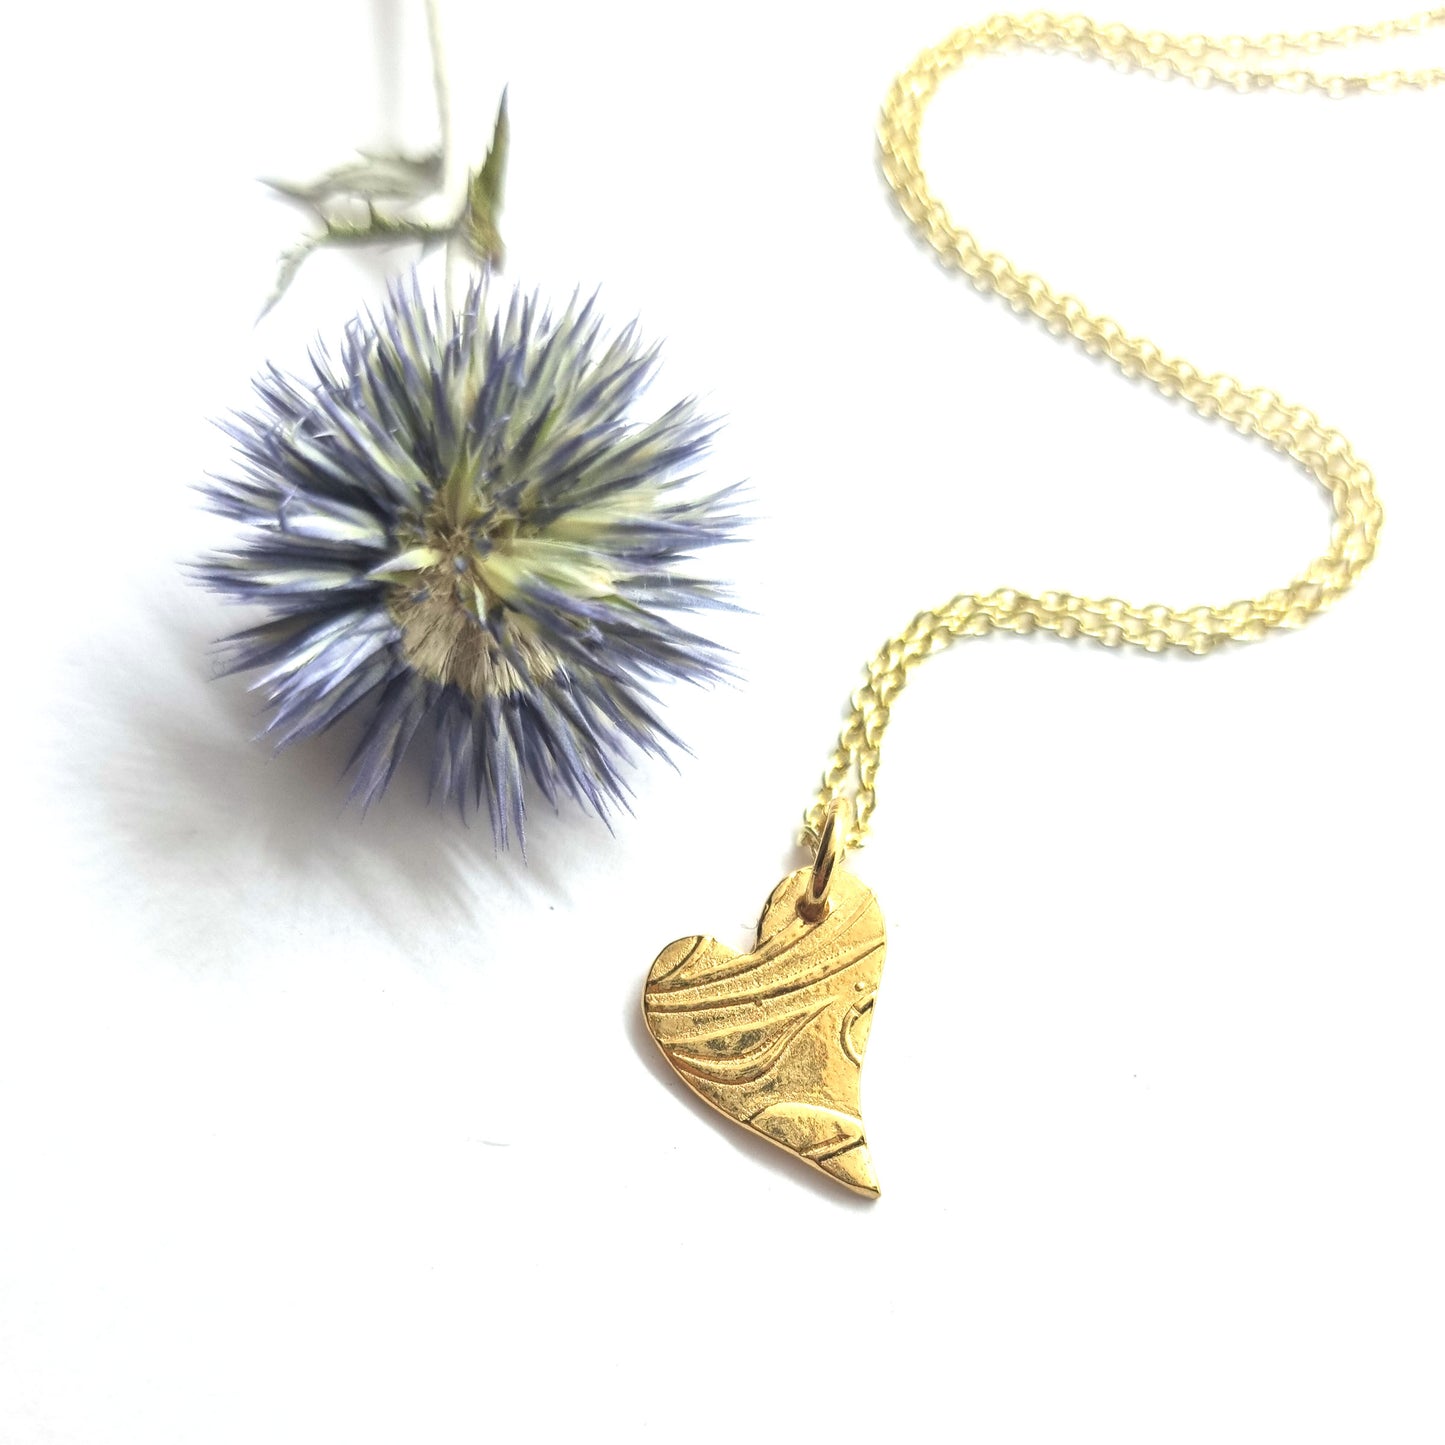 Yellow gold vermeil asymmetrical heart pendant with a leaf & vine design on a yellow gold vermeil chain. Pictured with a flower.